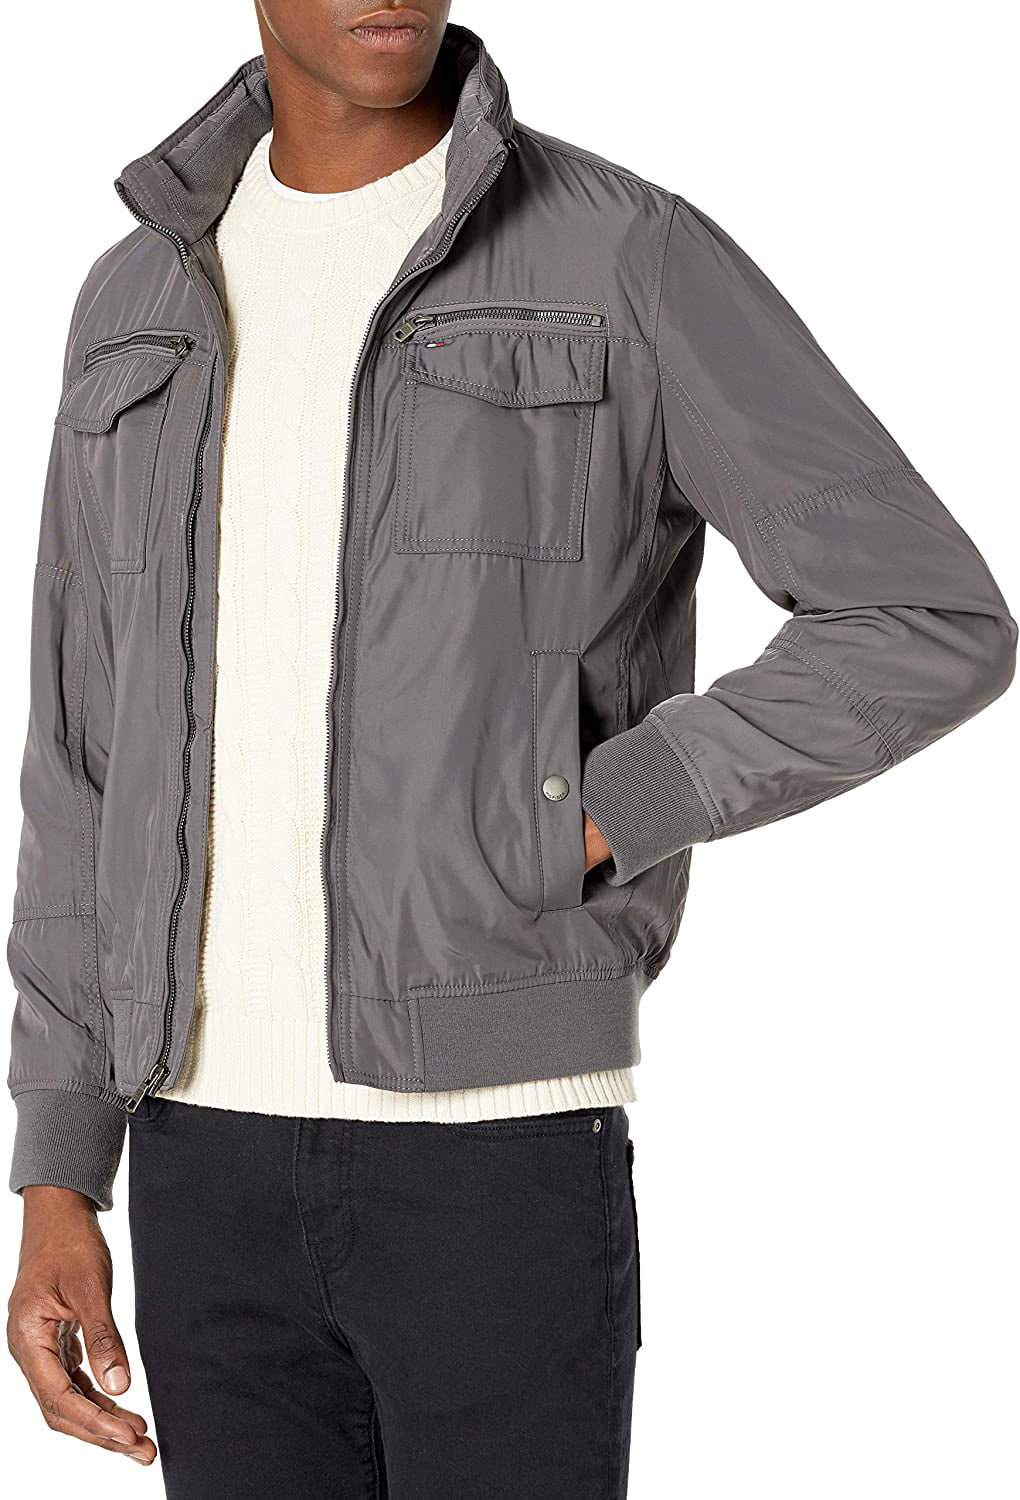 Standard and Big & Tall Tommy Hilfiger Men's Water Resistant Softshell Jacket 